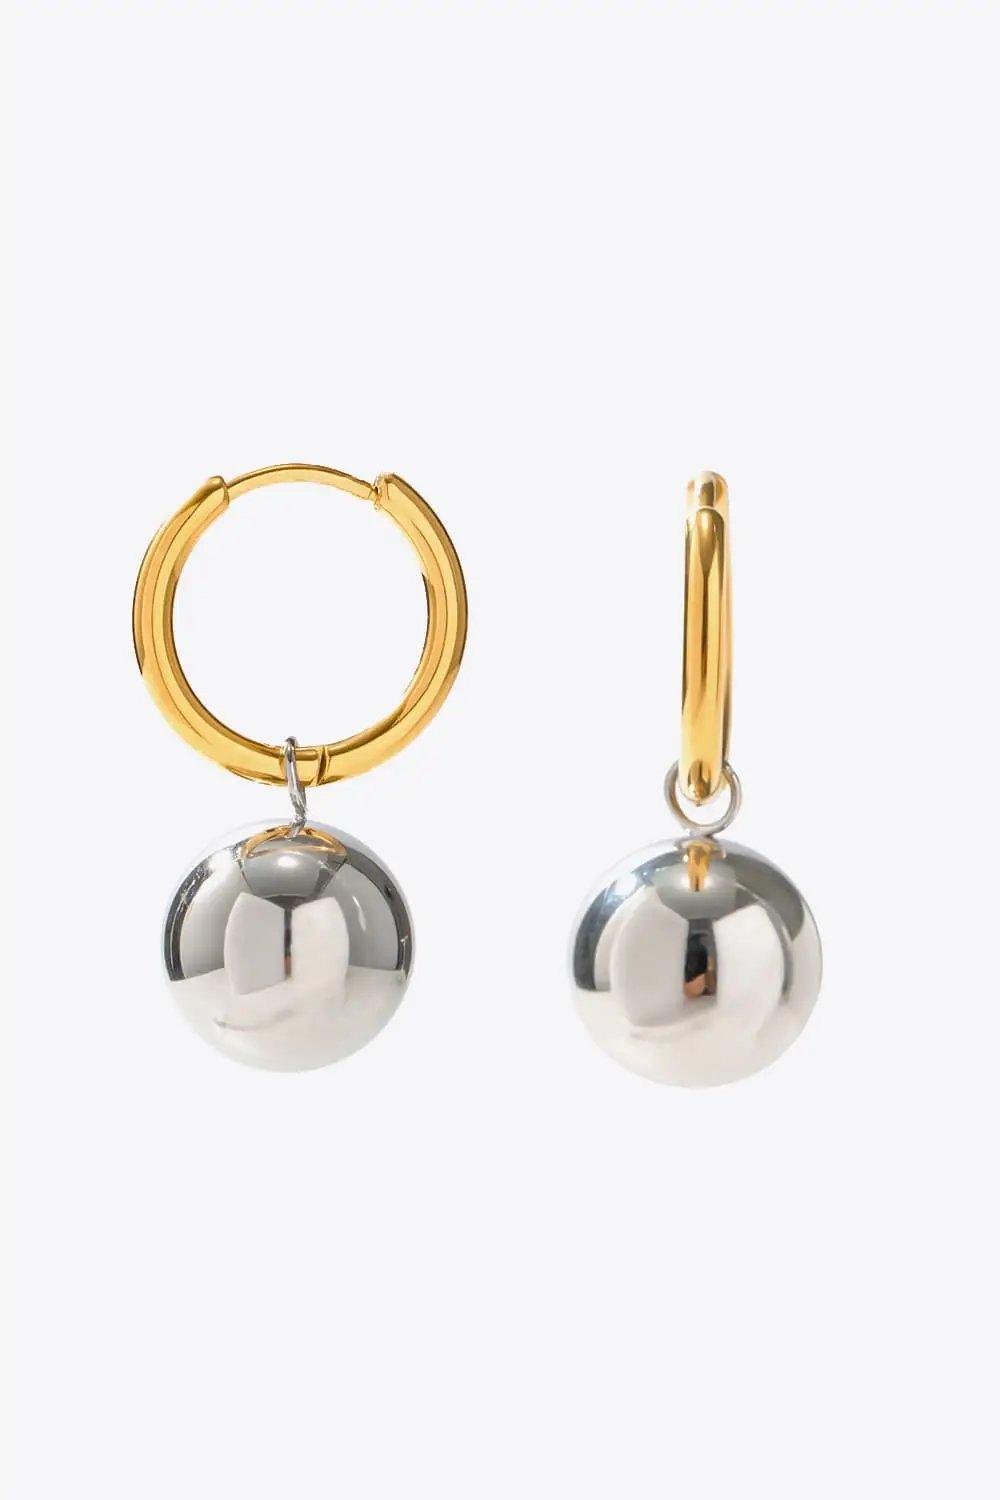 Drop Earrings with 18K Gold-Plated Copper Balls - Maves Apparel